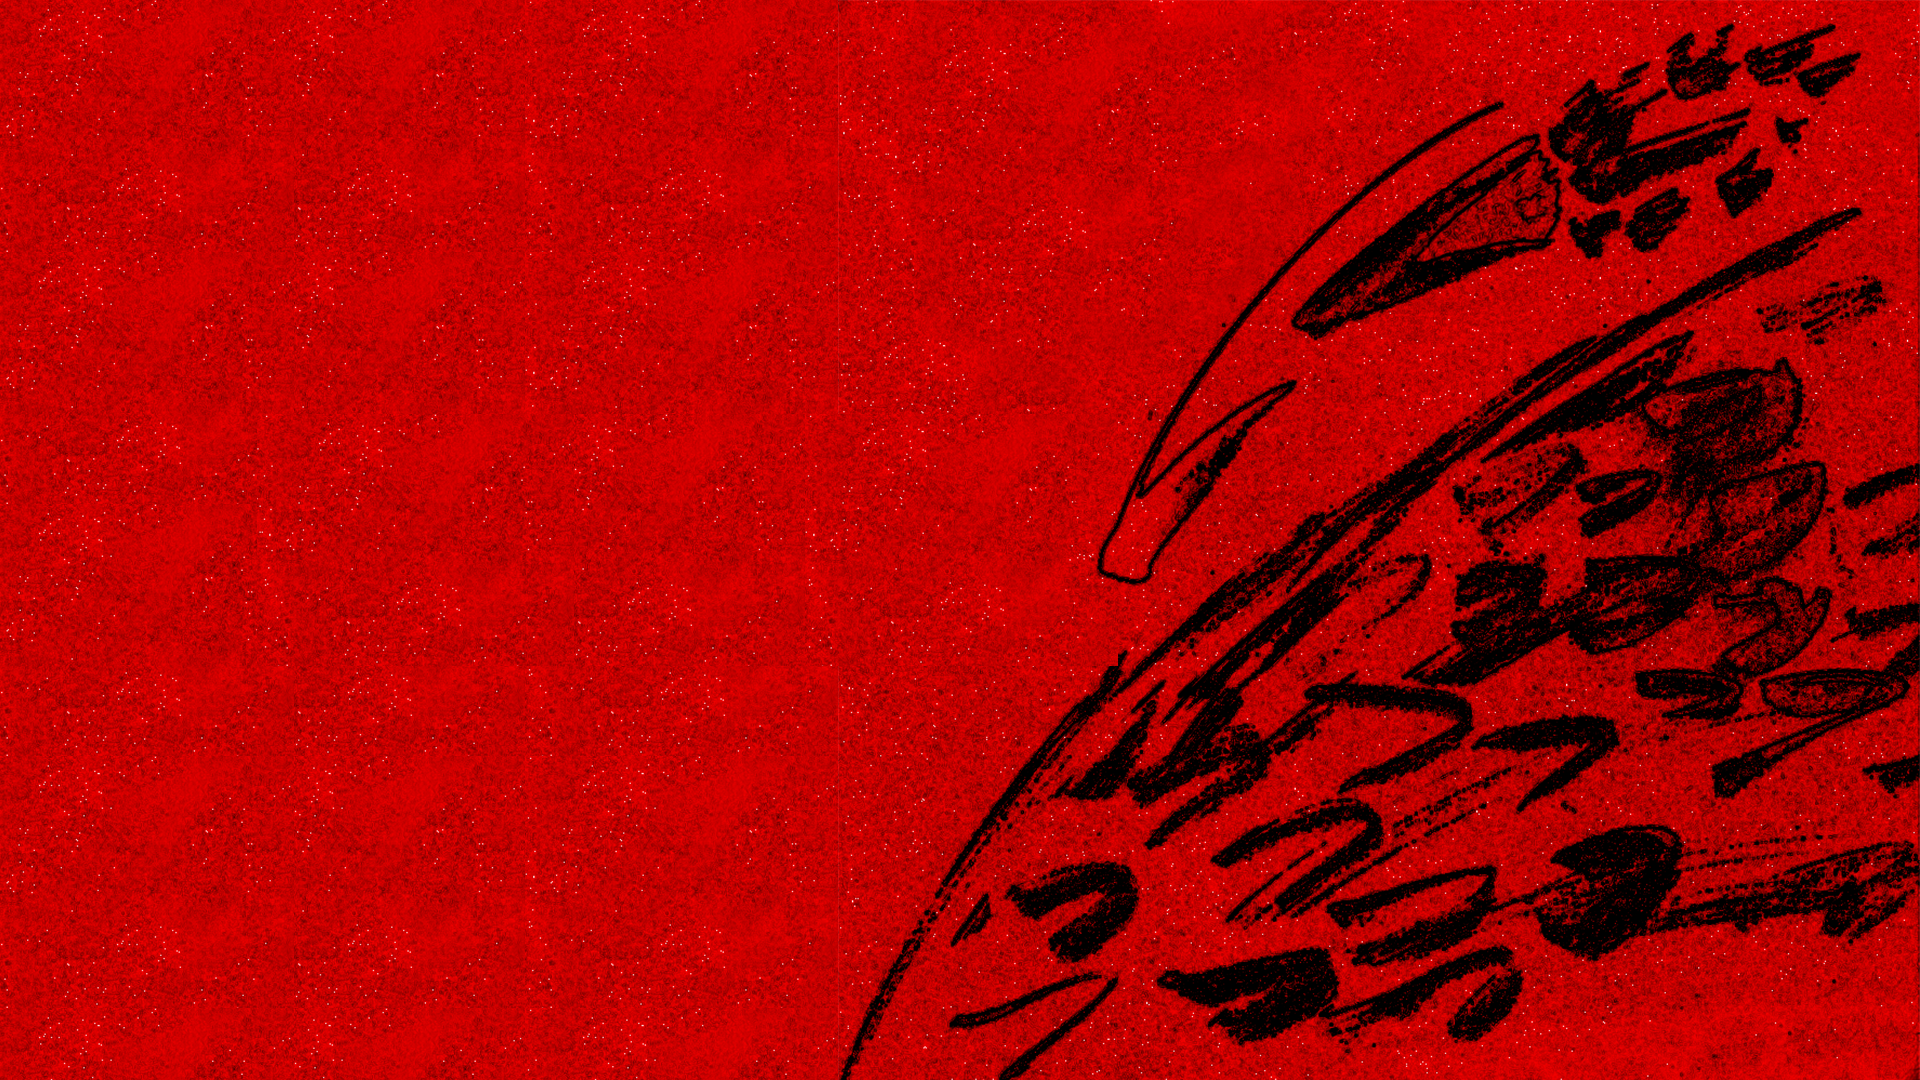 General 1920x1080 eagle red drawing red background digital art simple background